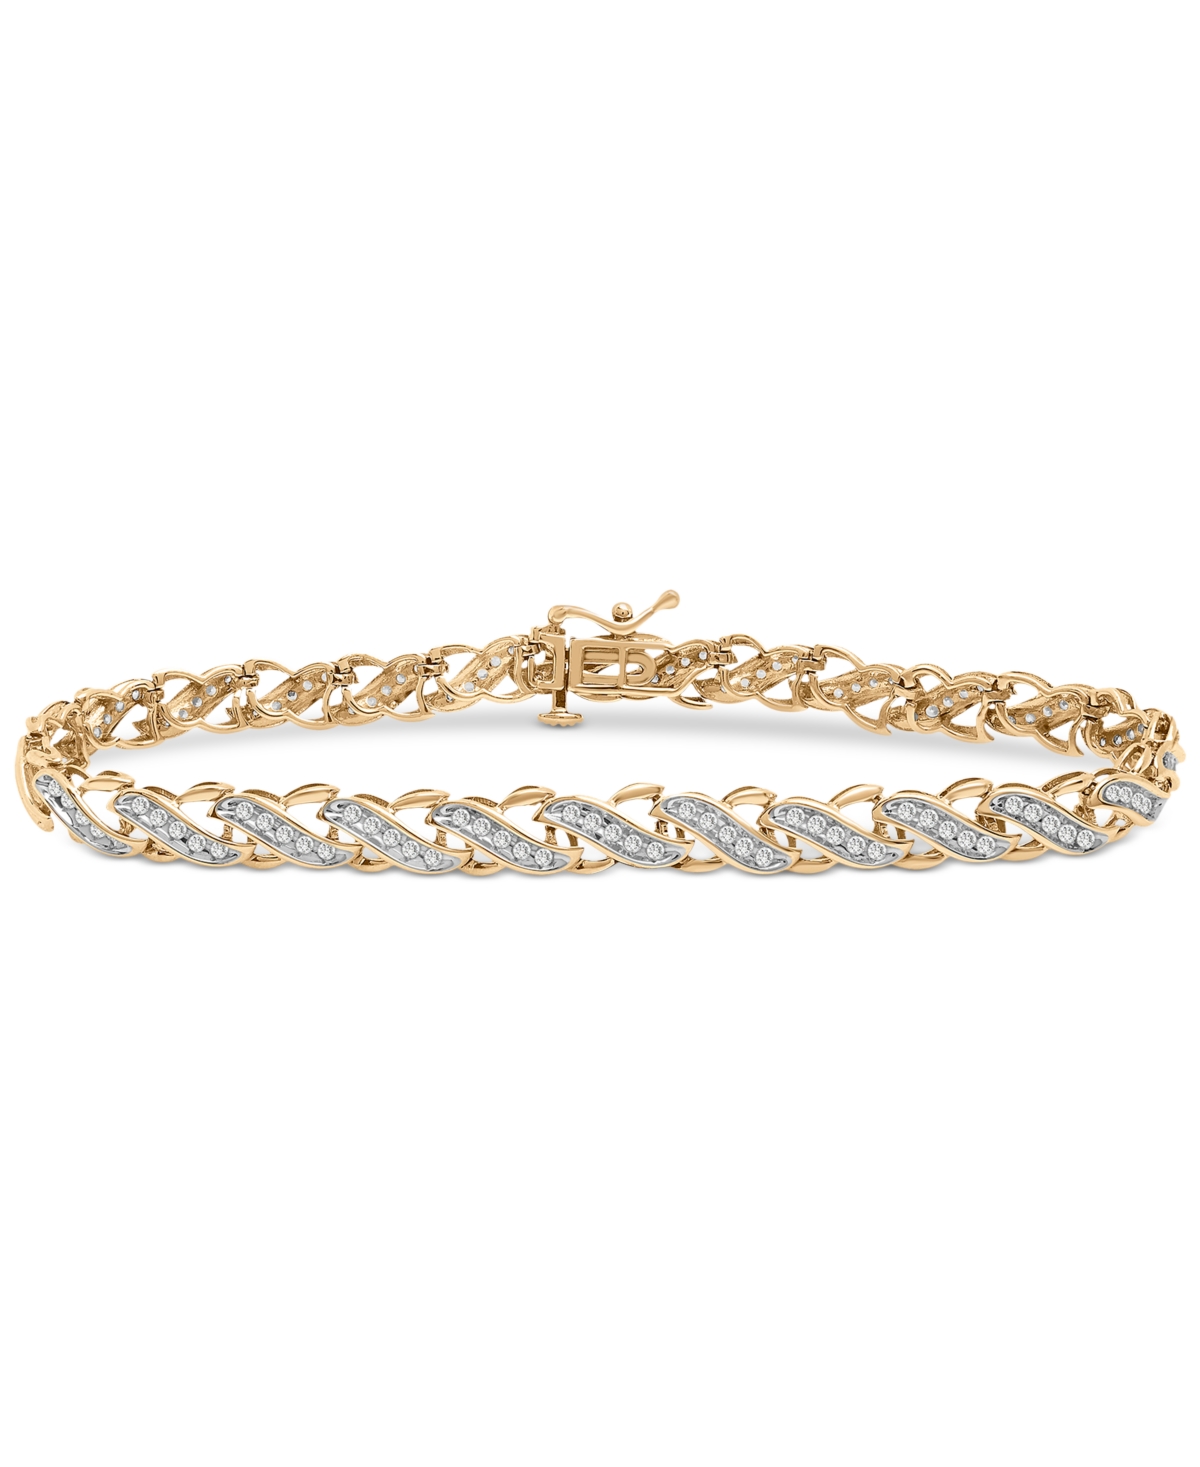 Diamond Diagonal Link Bracelet (1 ct. t.w.) in 10k Gold, Created for Macy's - Yellow Gold